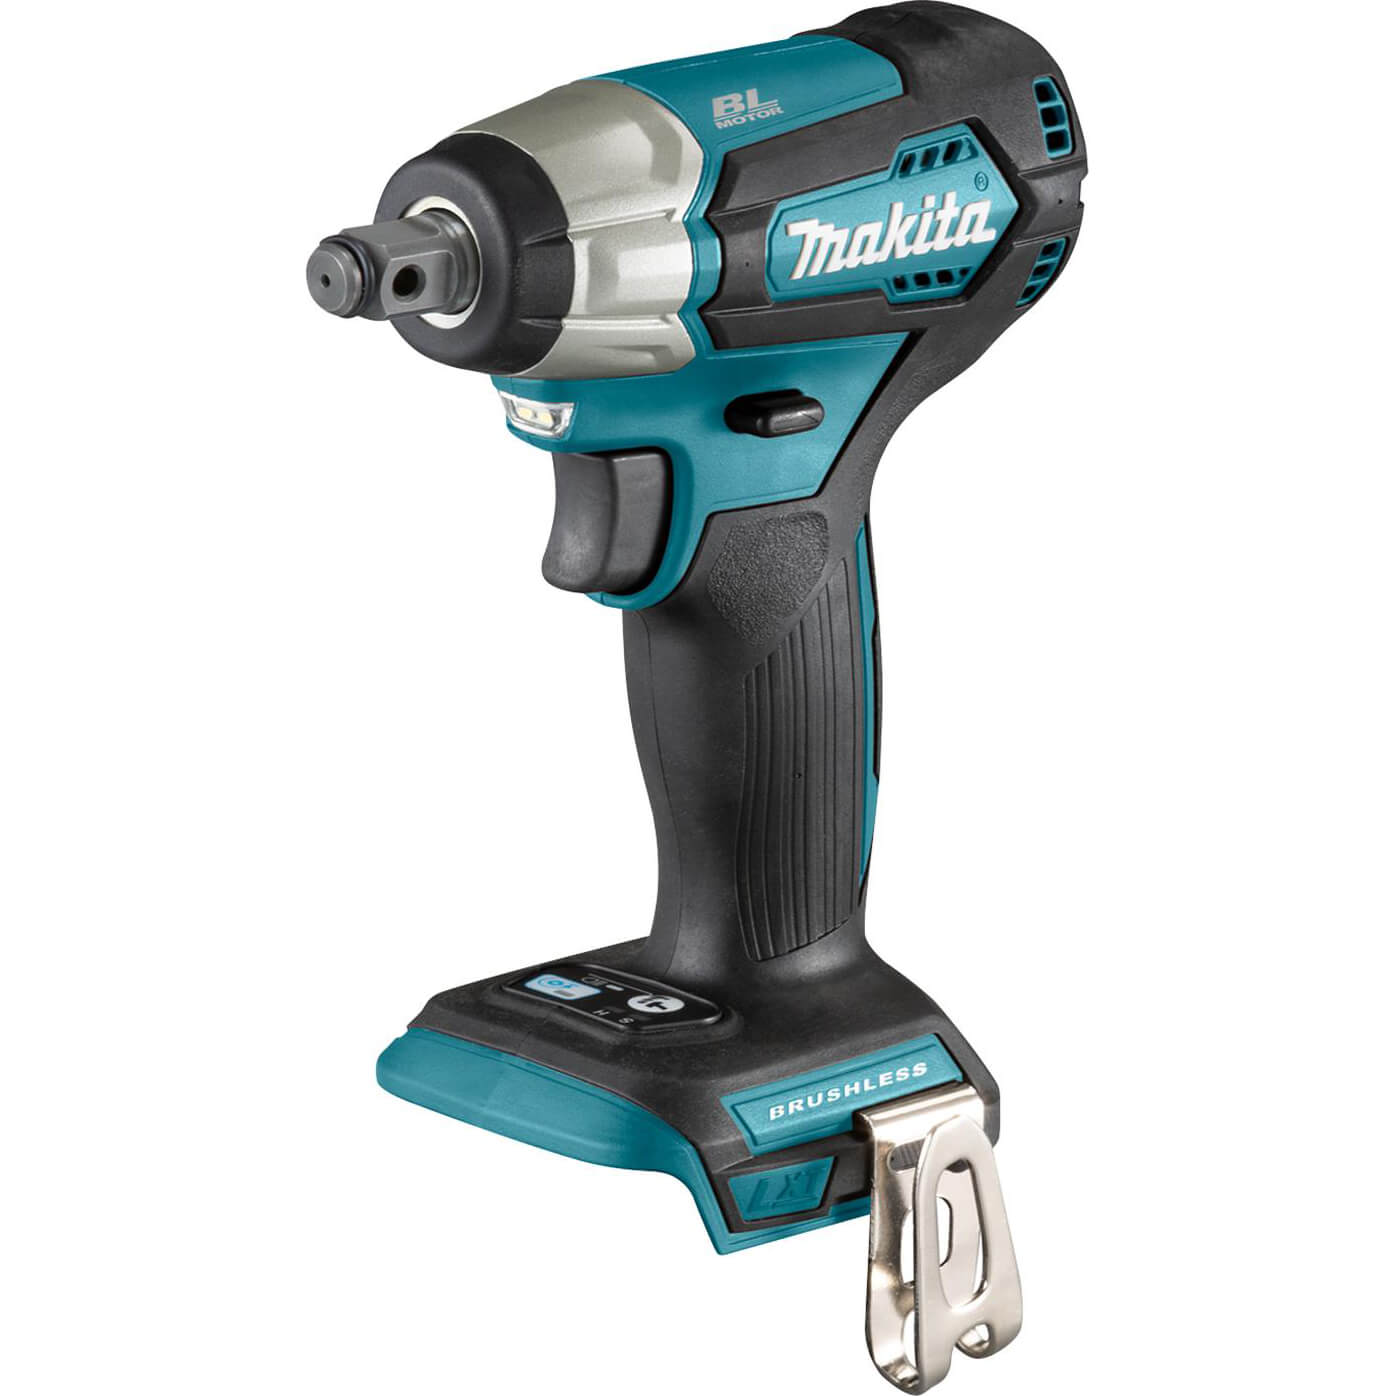 Image of Makita DTW181 18v LXT Cordless Brushless 1/2" Drive Impact Wrench No Batteries No Charger No Case